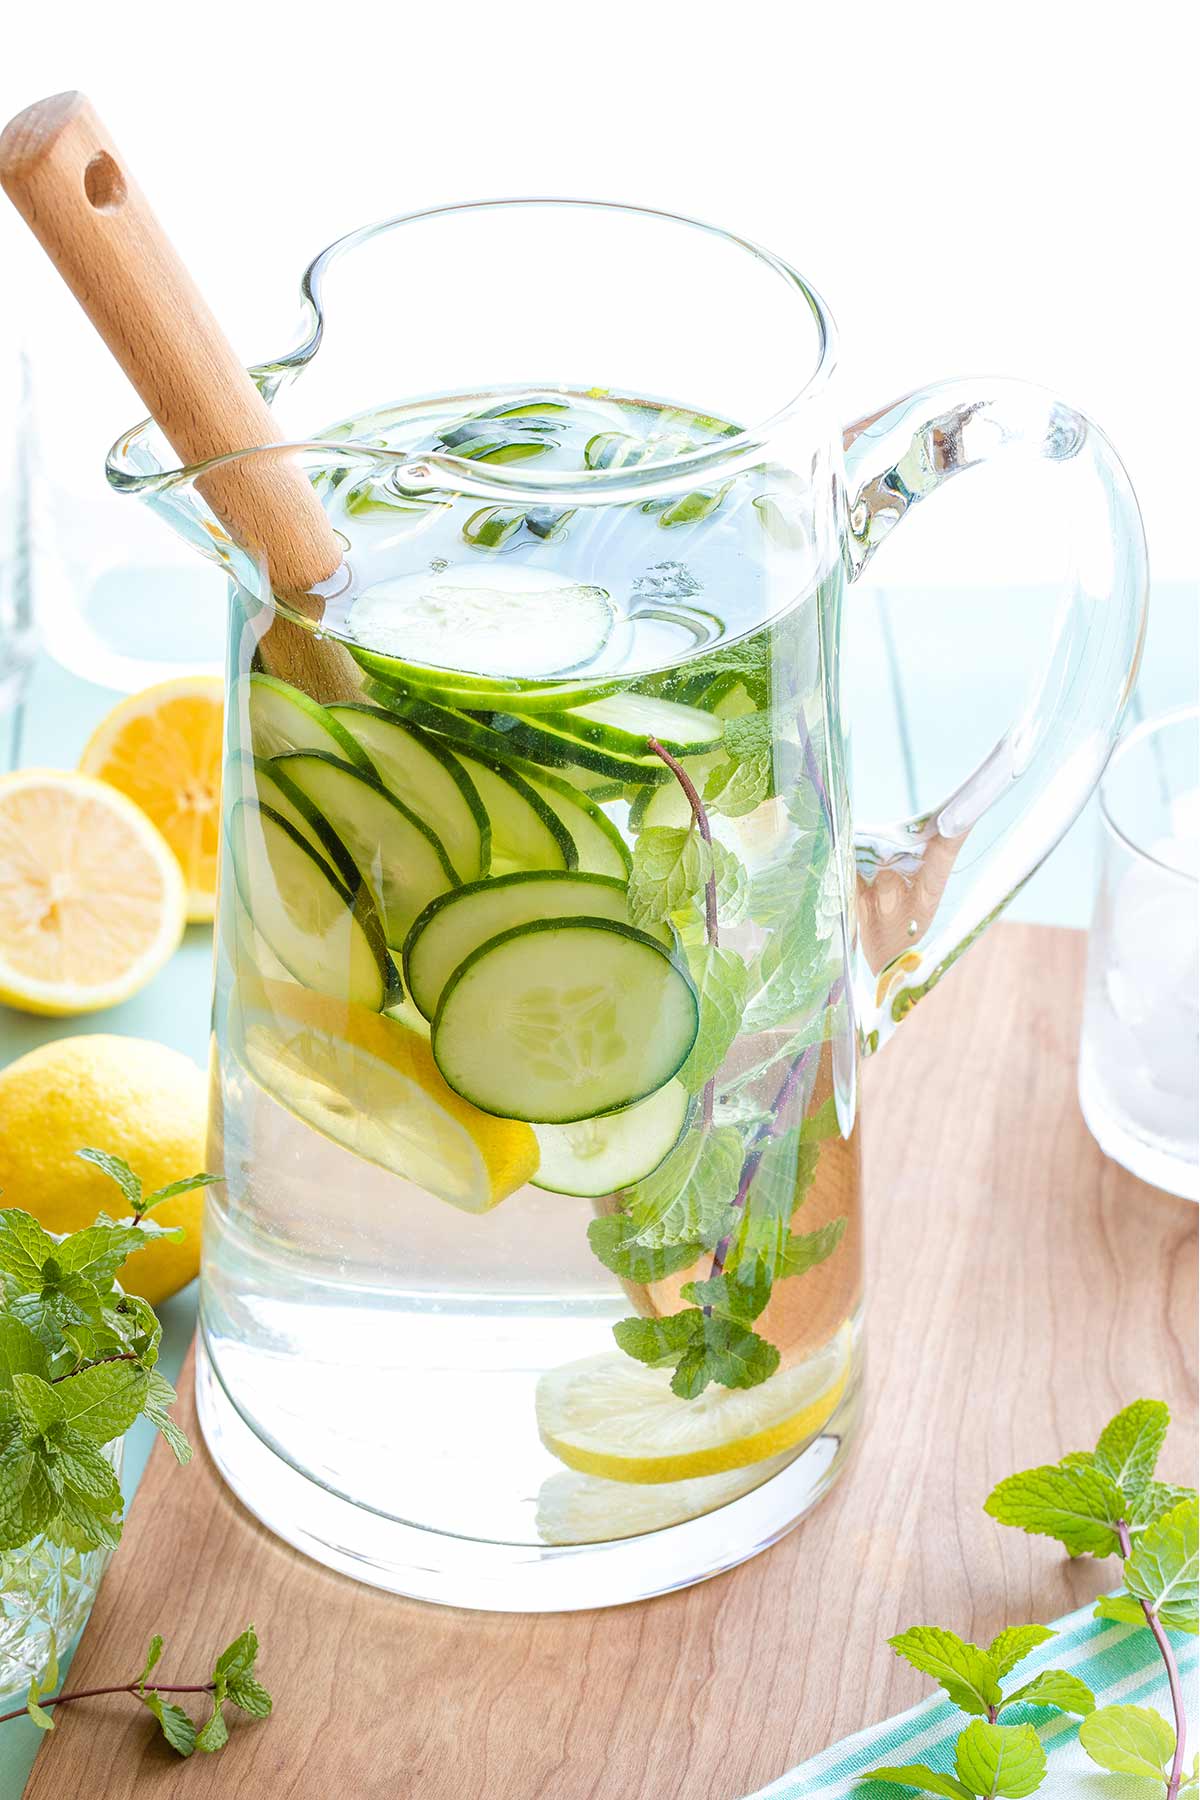 Glass pitcher full of water and infusing ingredients, with wooden spoon in for stirring.